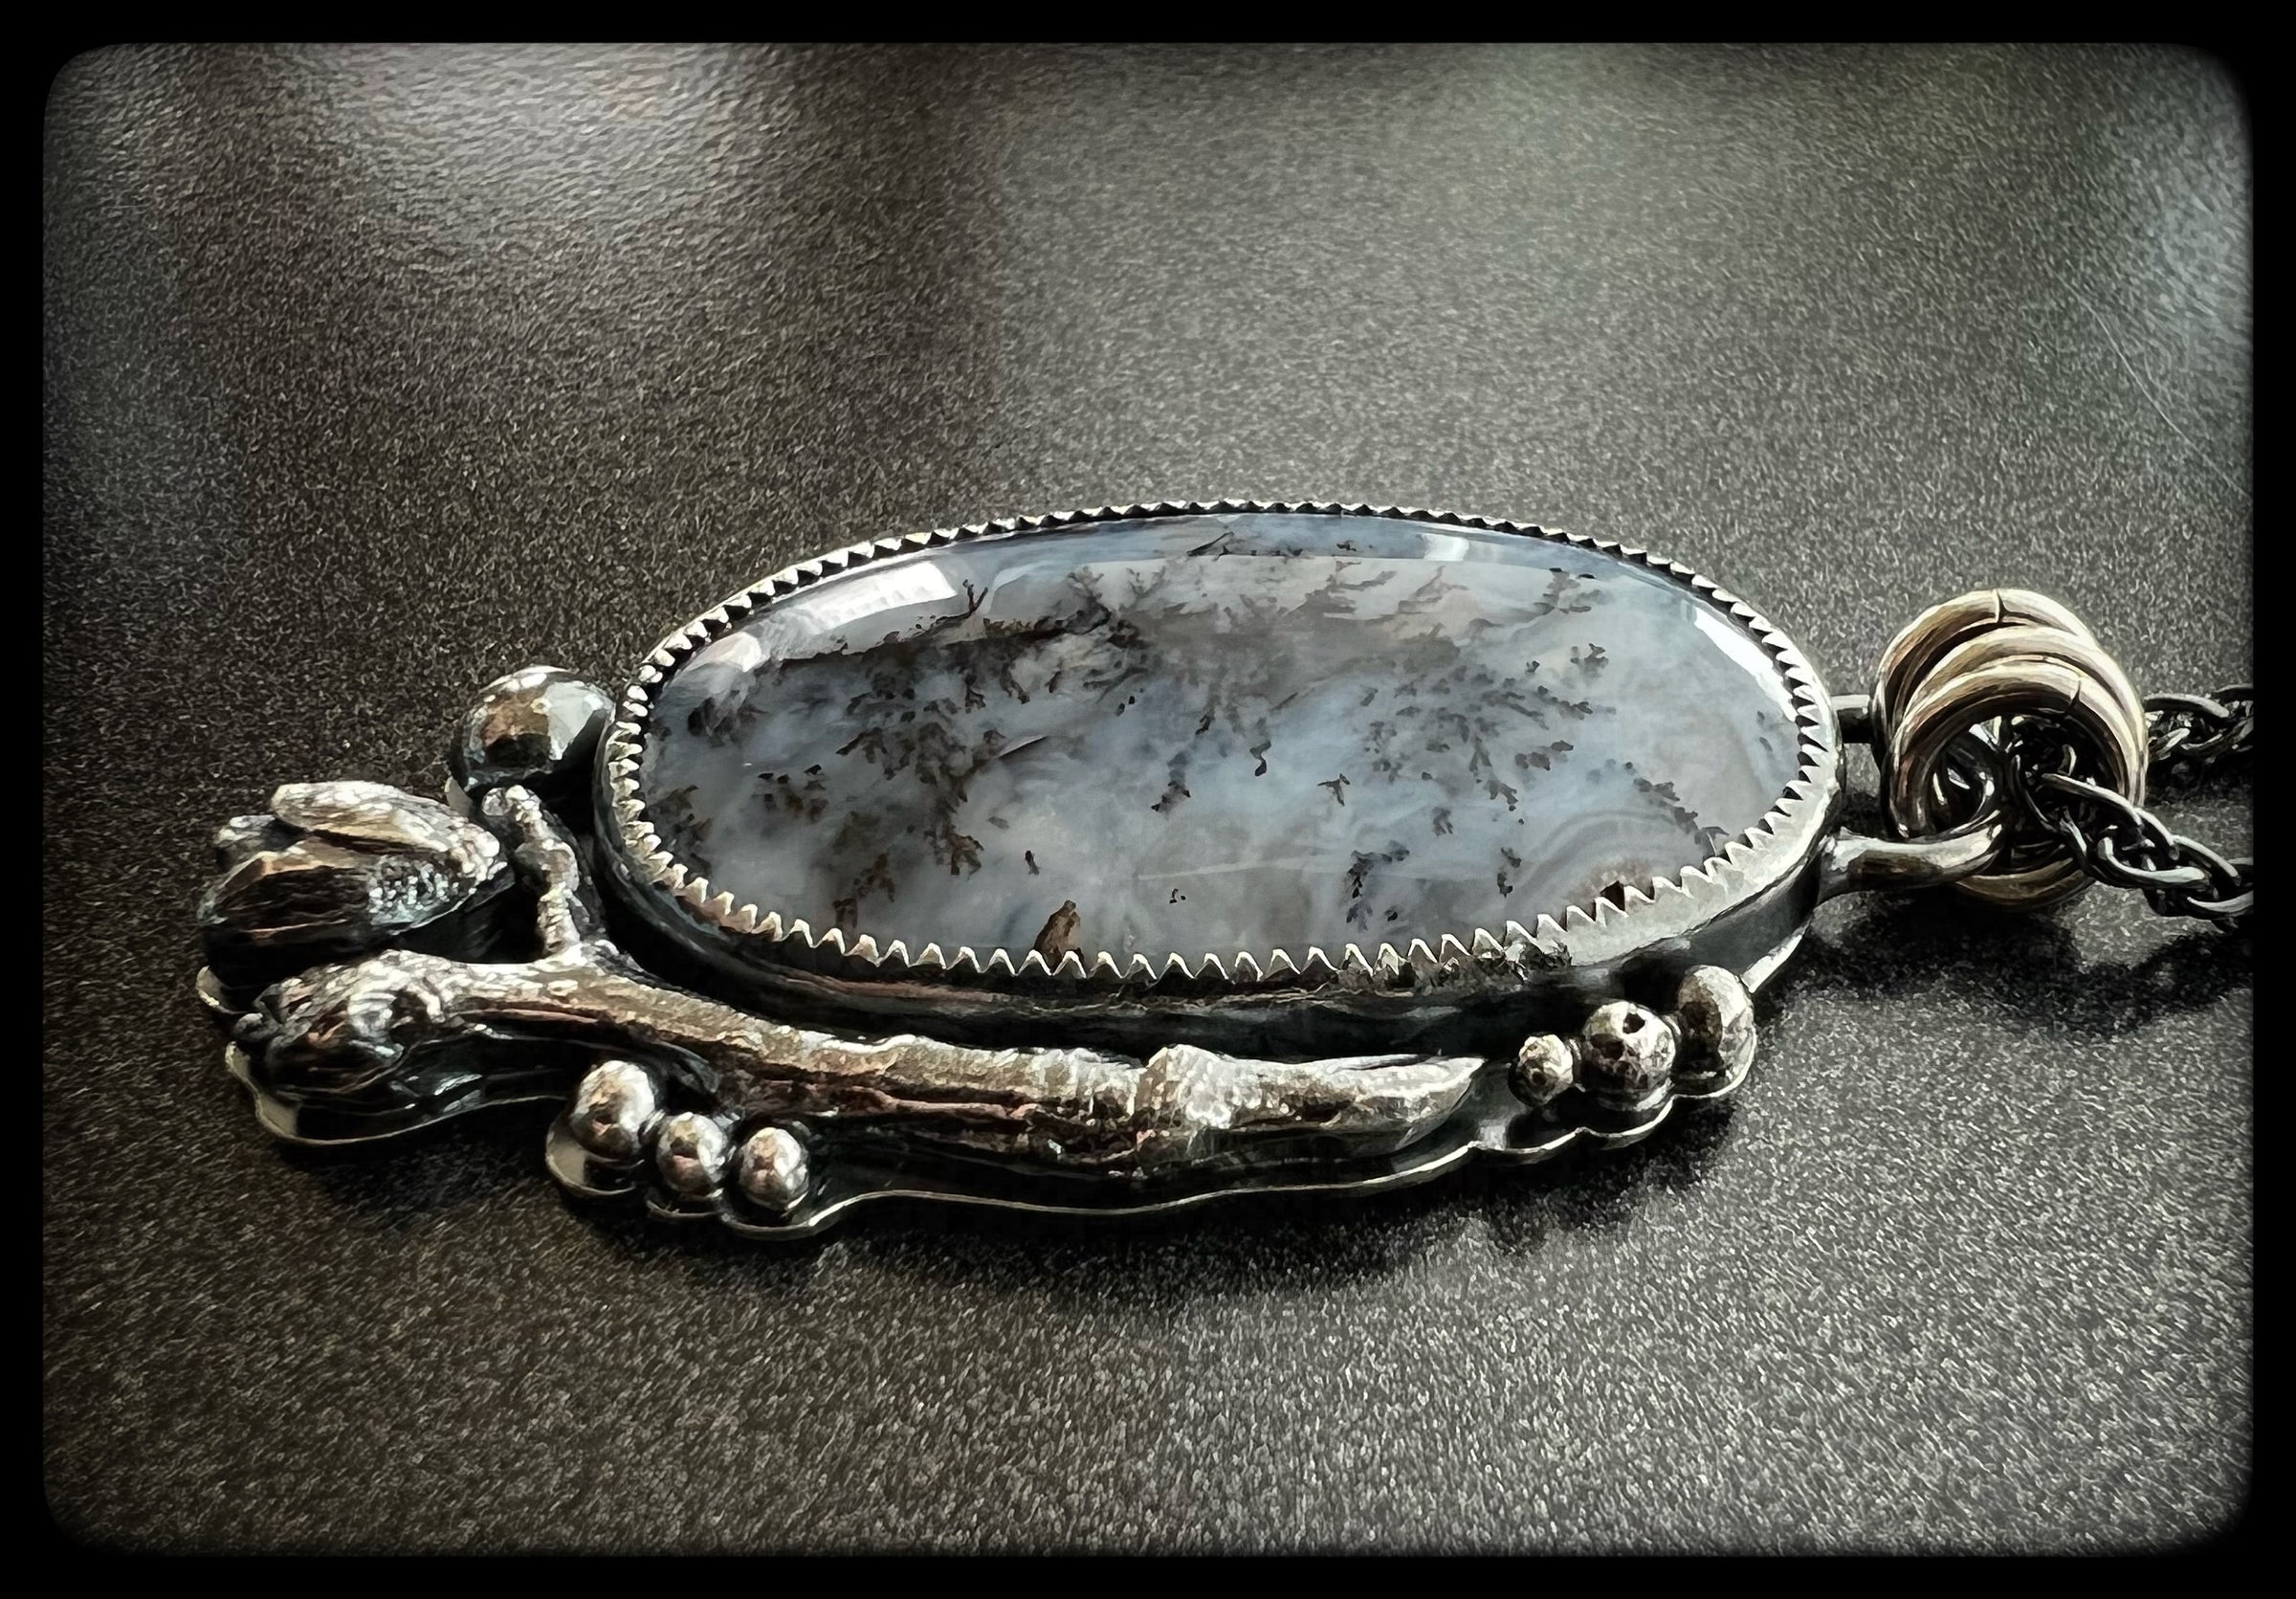 Dendritic Agate Pendant Necklace with cast sterling silver northern cedar branch and cones on a sterling silver chain.